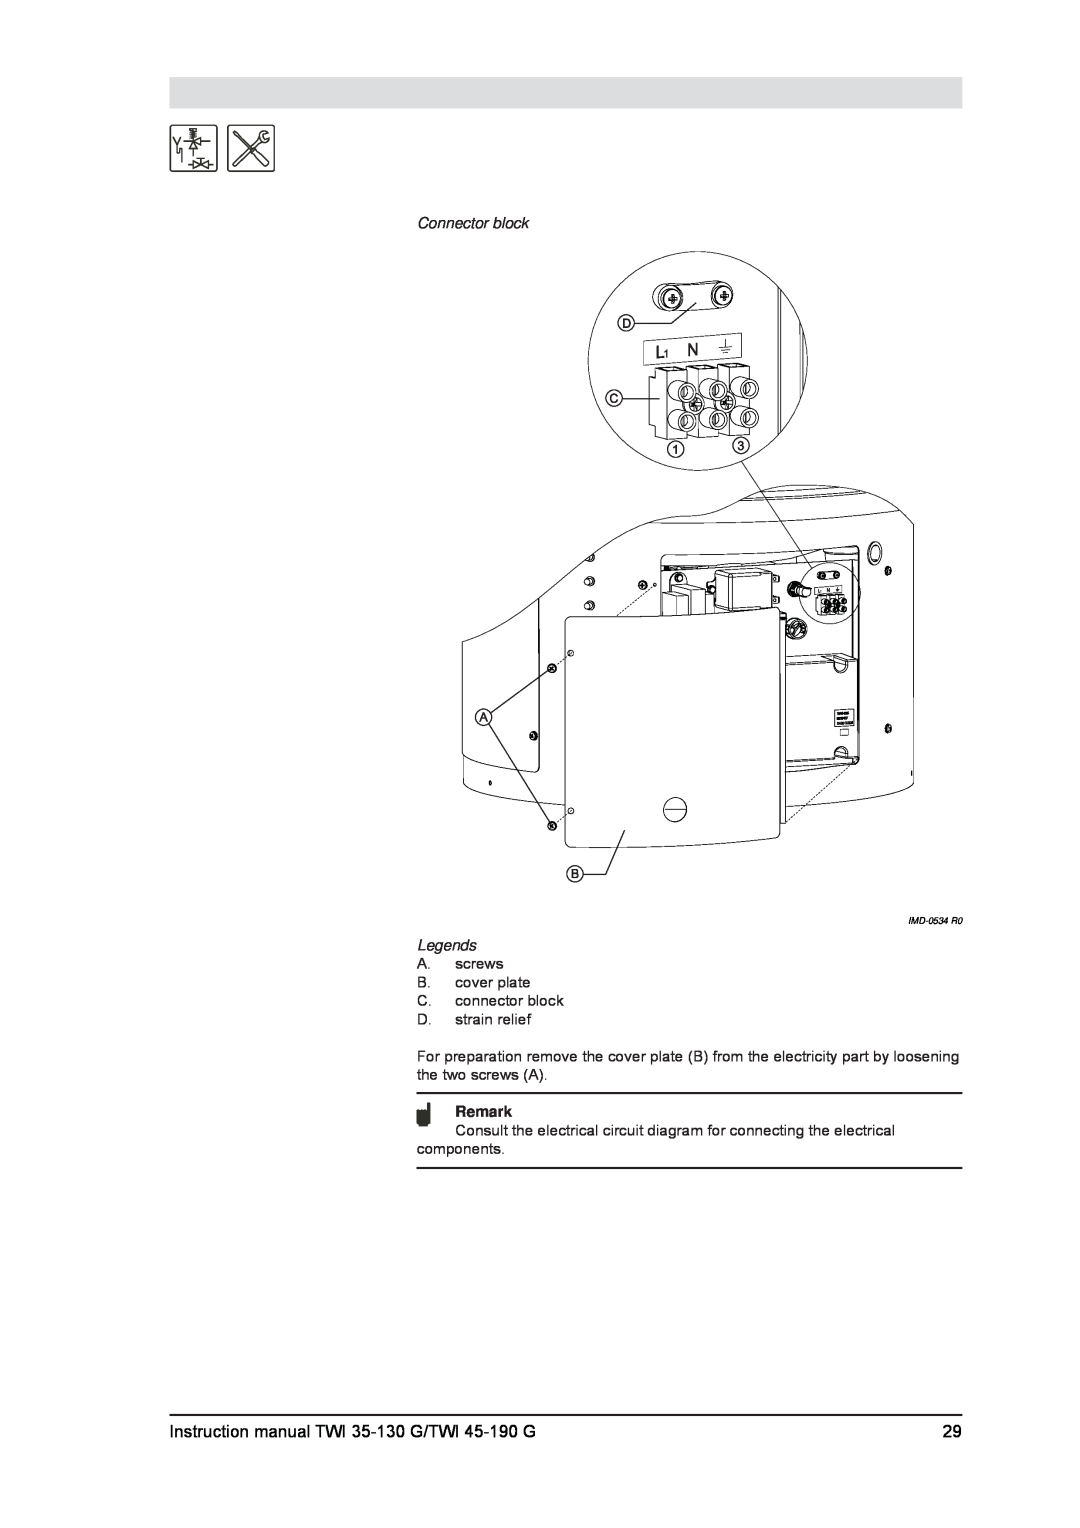 A.O. Smith Instruction manual TWI 35-130 G/TWI 45-190 G, A. screws B. cover plate C. connector block D. strain relief 